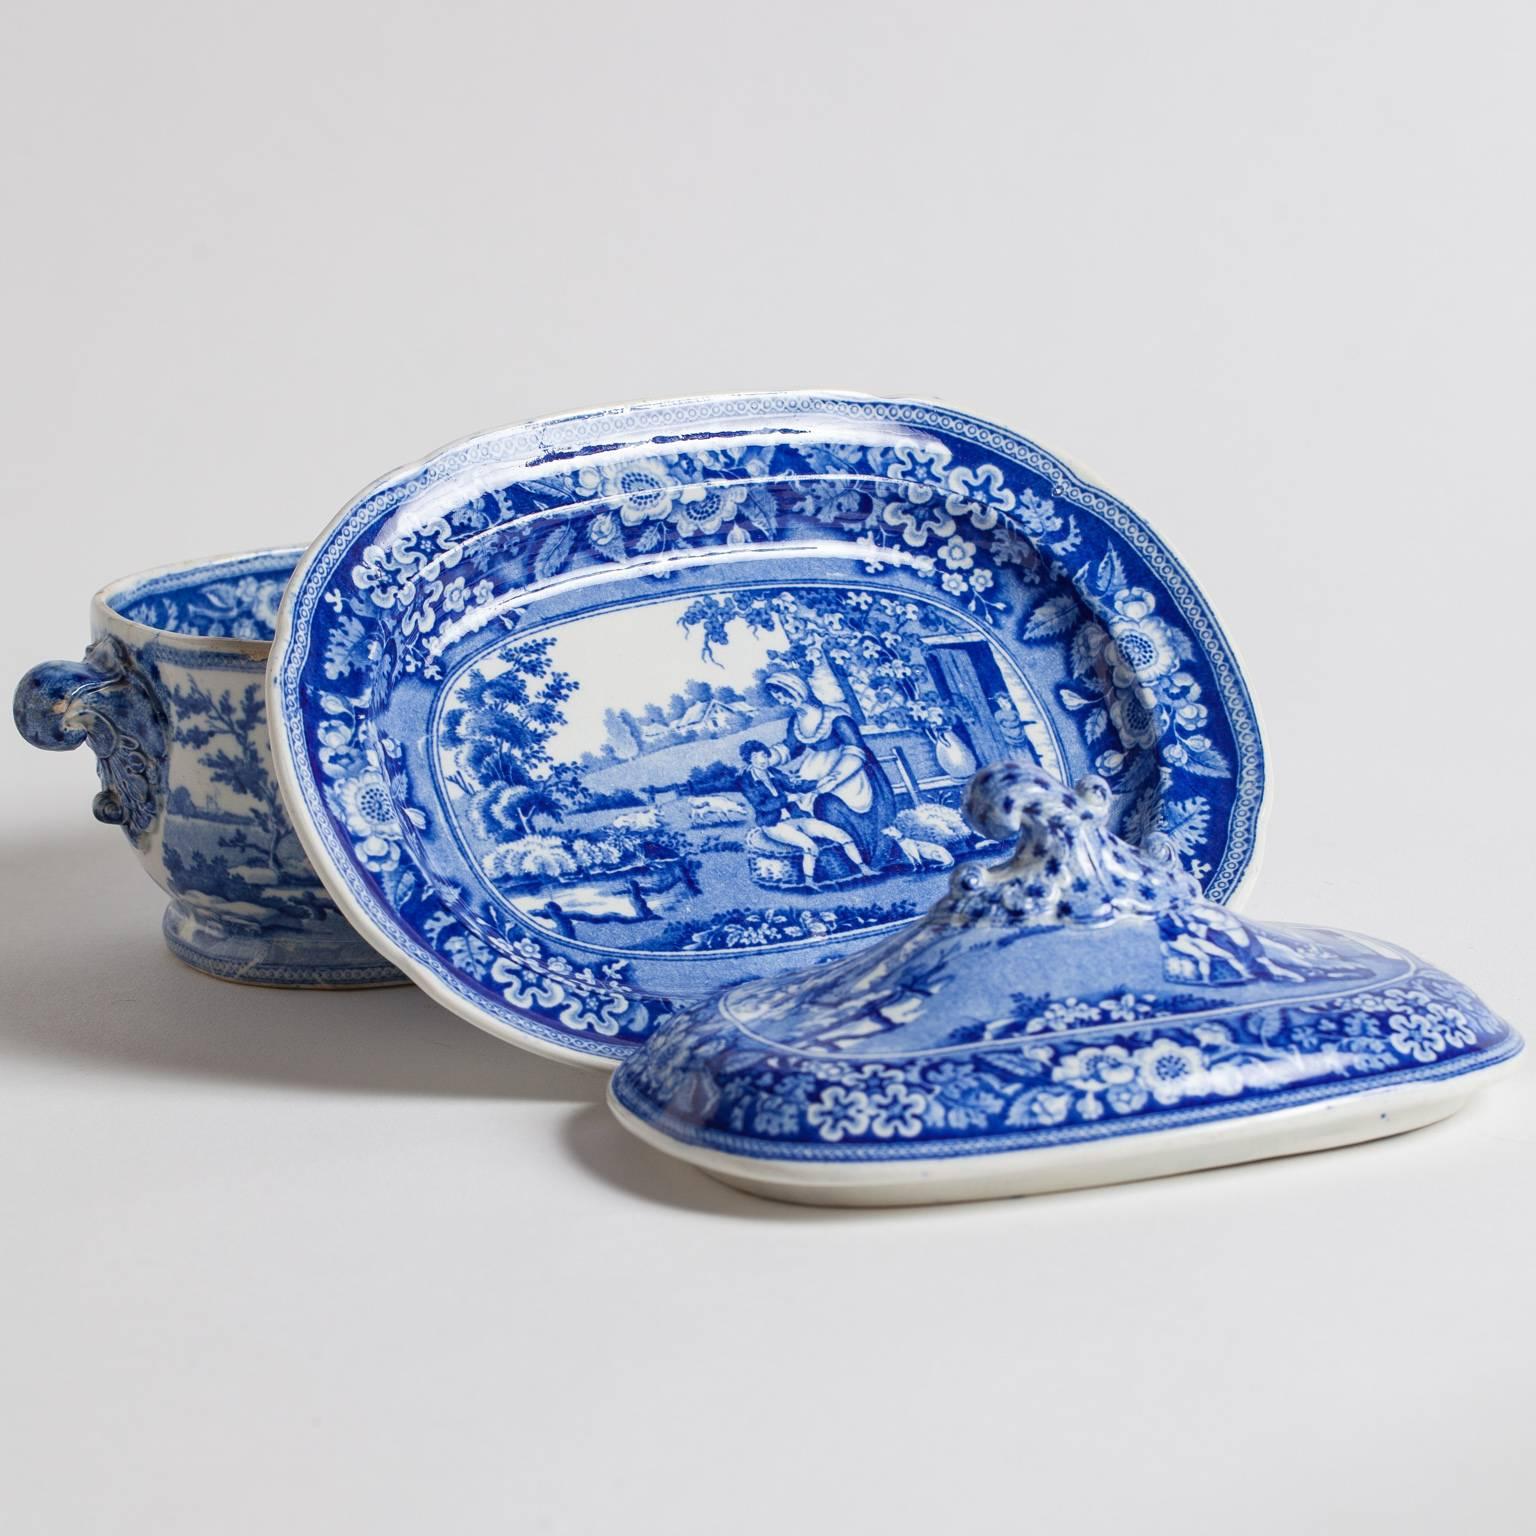 This three-piece sauce dish with matching under dish has decorative finials on the top and sides. The pattern is “The Blind Boy” by John and William Ridgeway, circa 1840.

Measures: 6